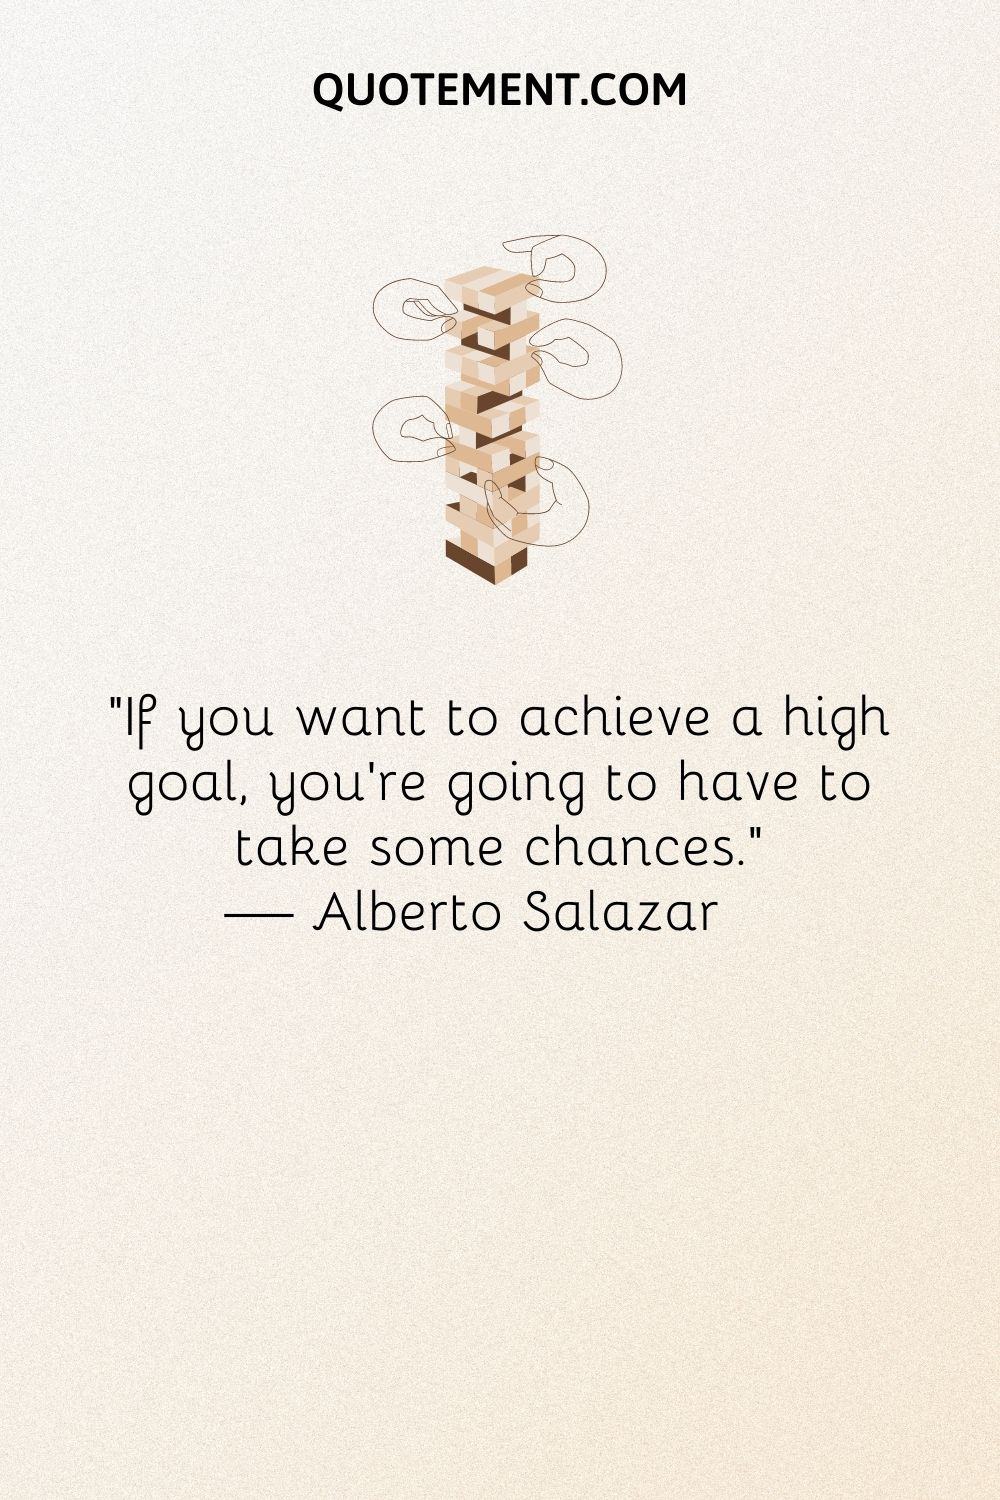 If you want to achieve a high goal, you’re going to have to take some chances